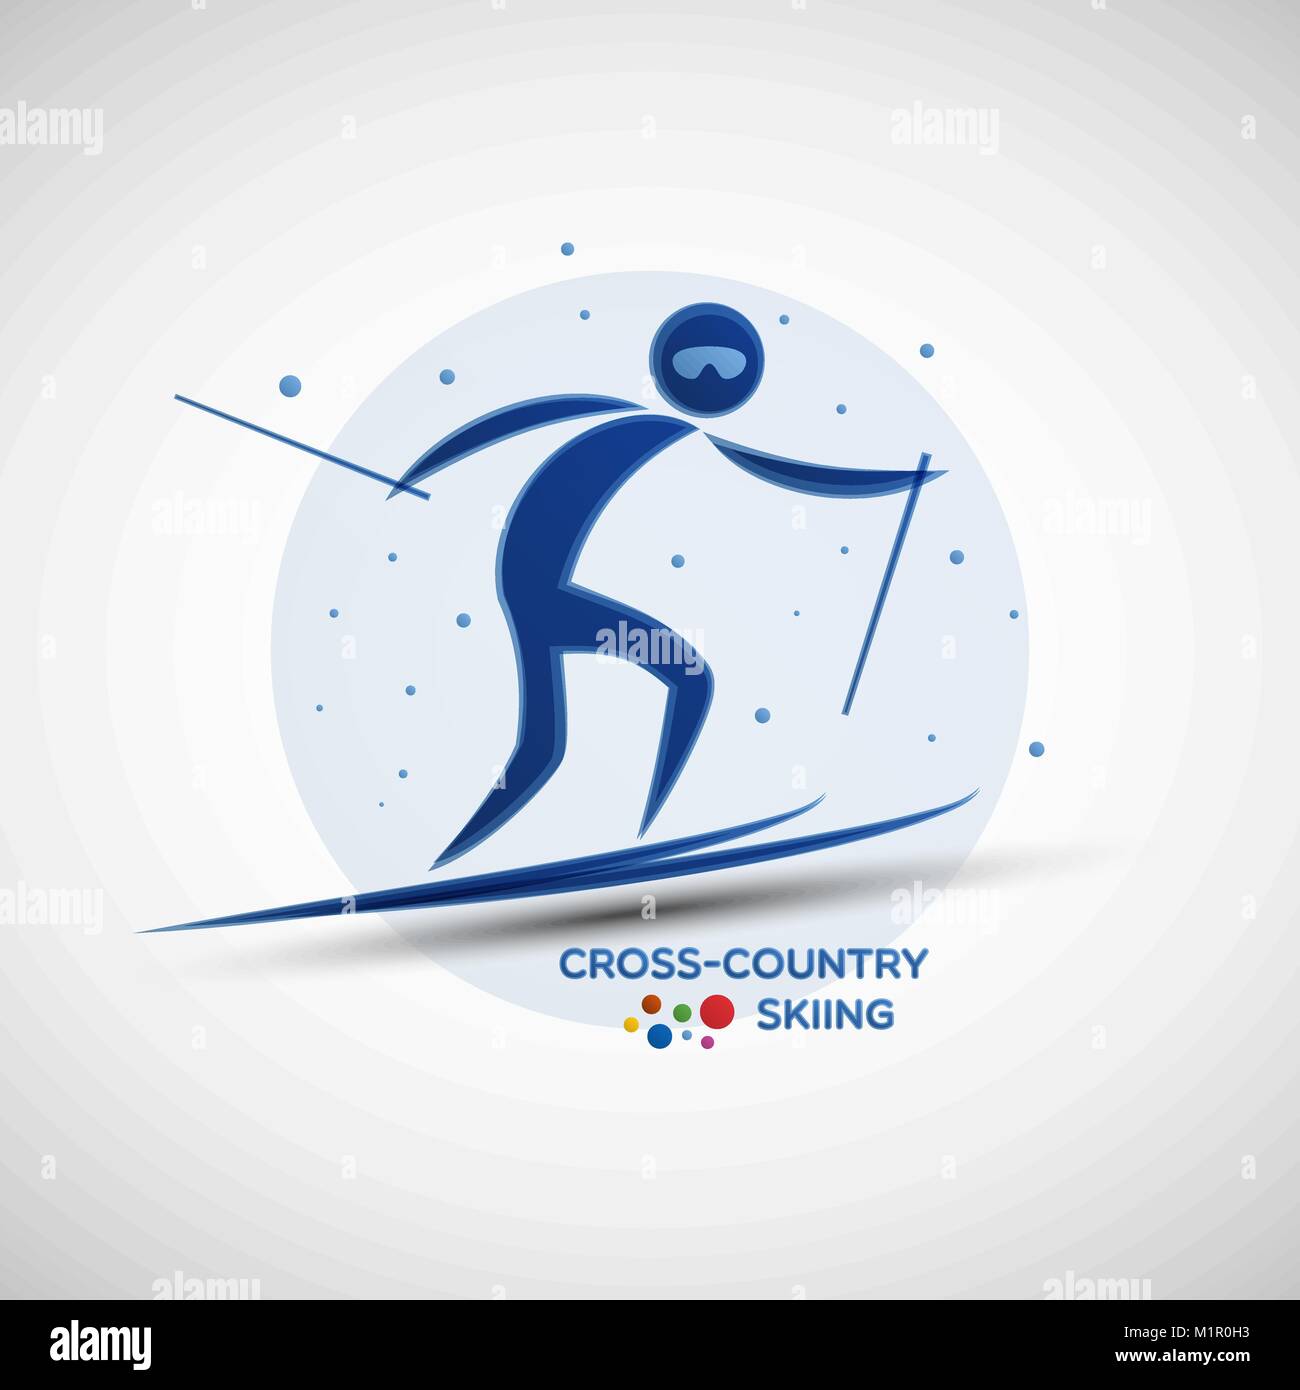 Cross-Country Skiing championship banner. Winter sports icon. Abstract sportsman silhouette. Vector illustration of cross-country skiing athlete Stock Vector